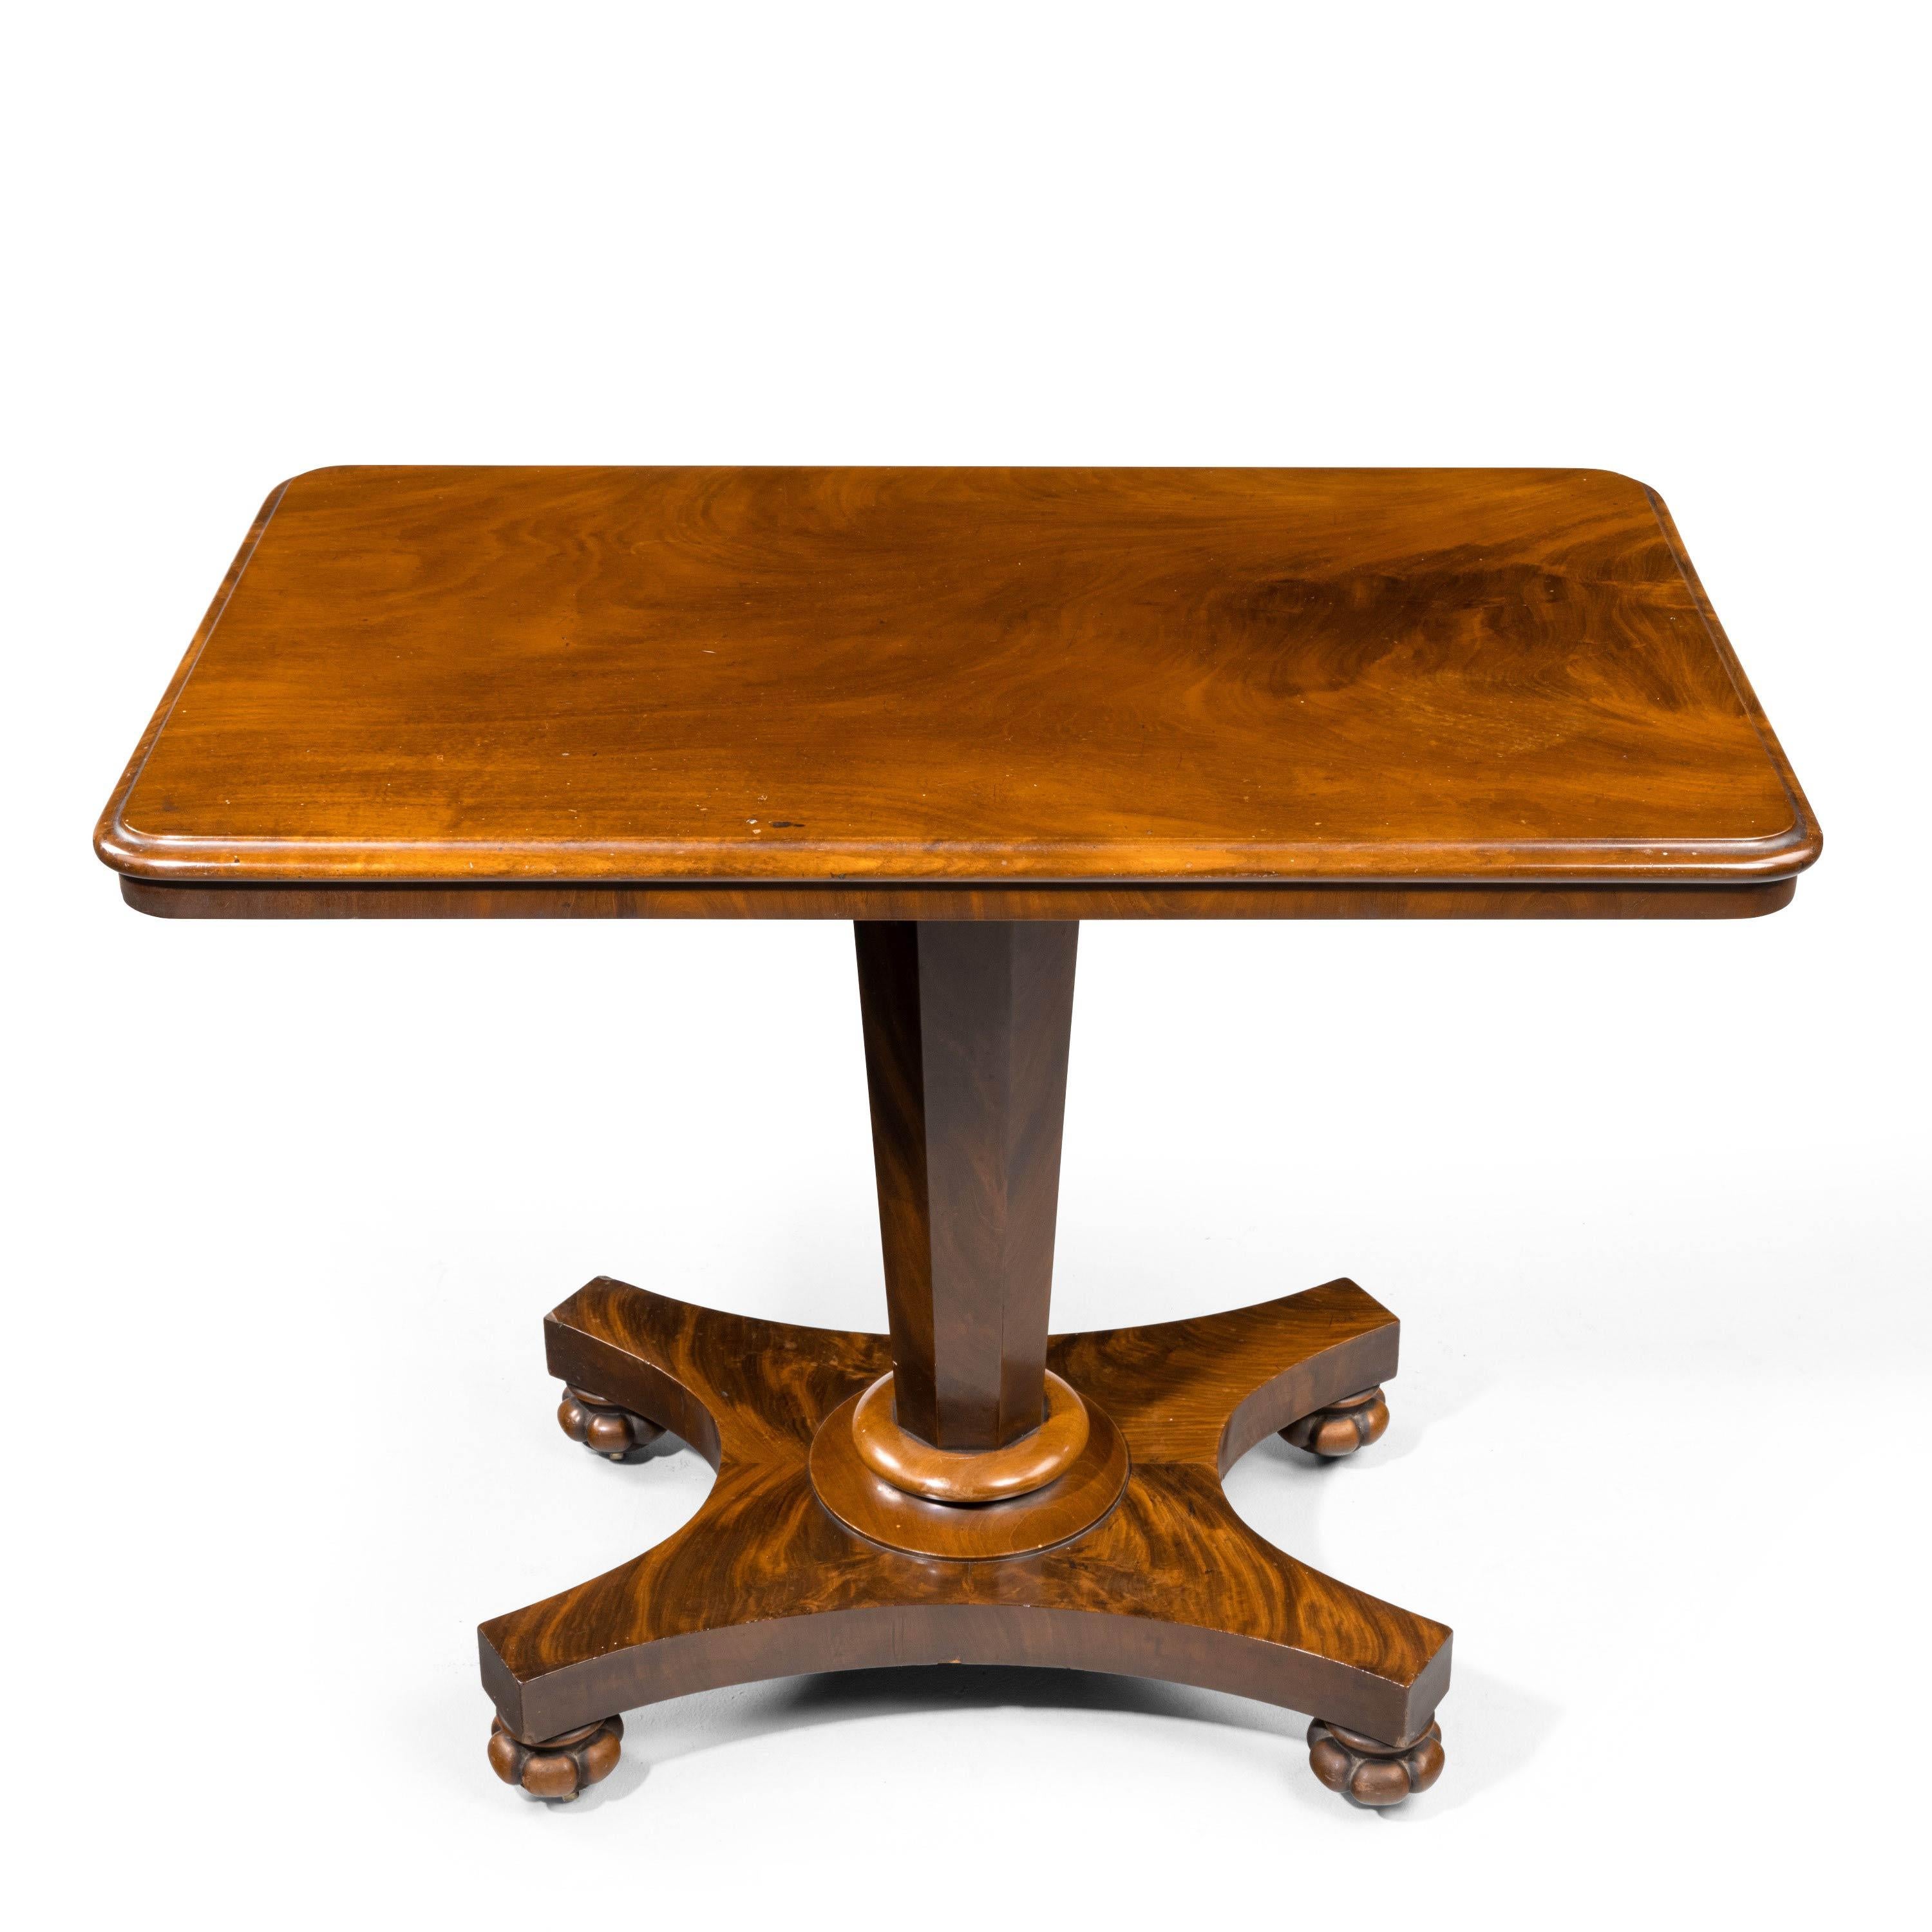 A late Regency period centre standing occasional table. On very well figured timbers with a shaped octagonal support over a serpentine platform base. Retaining the original shaped and carved feet.